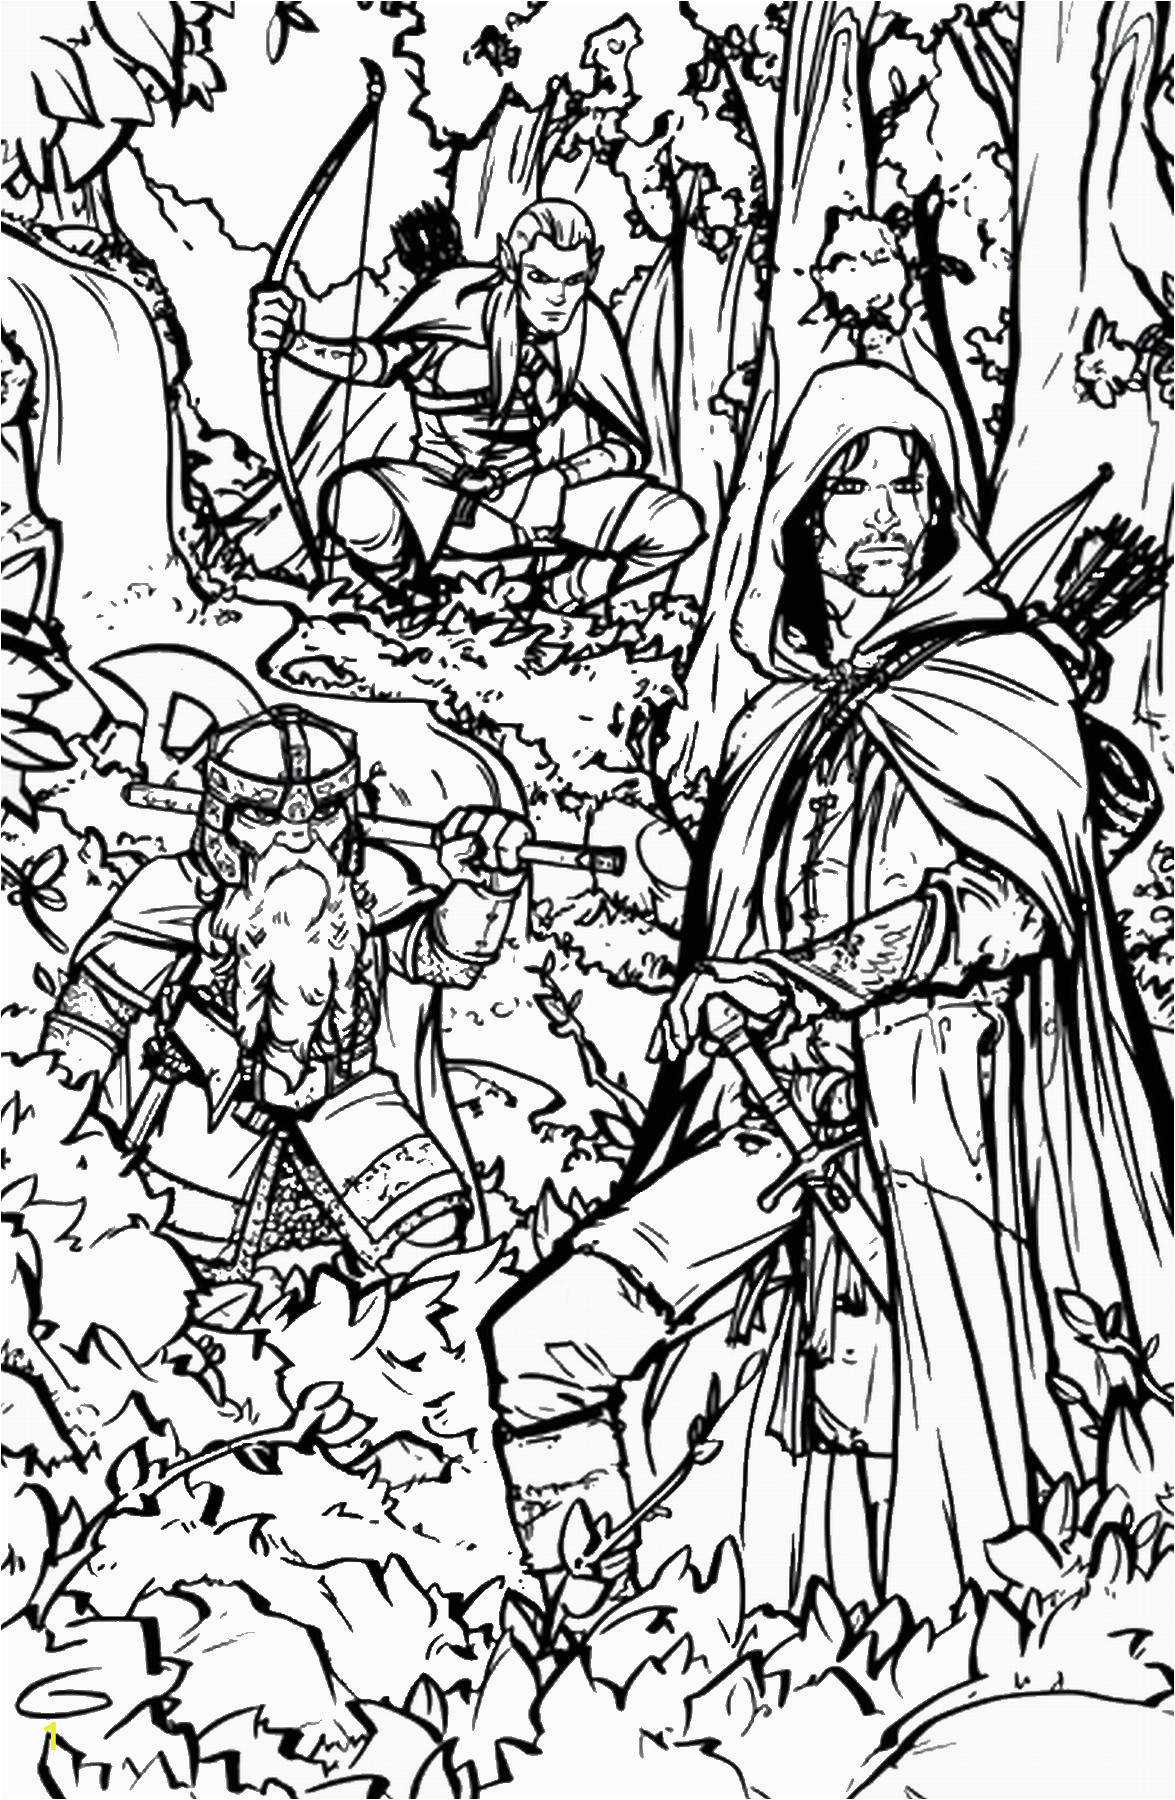 Lord Of the Rings Coloring Pages Lord Of the Rings Coloring Pages